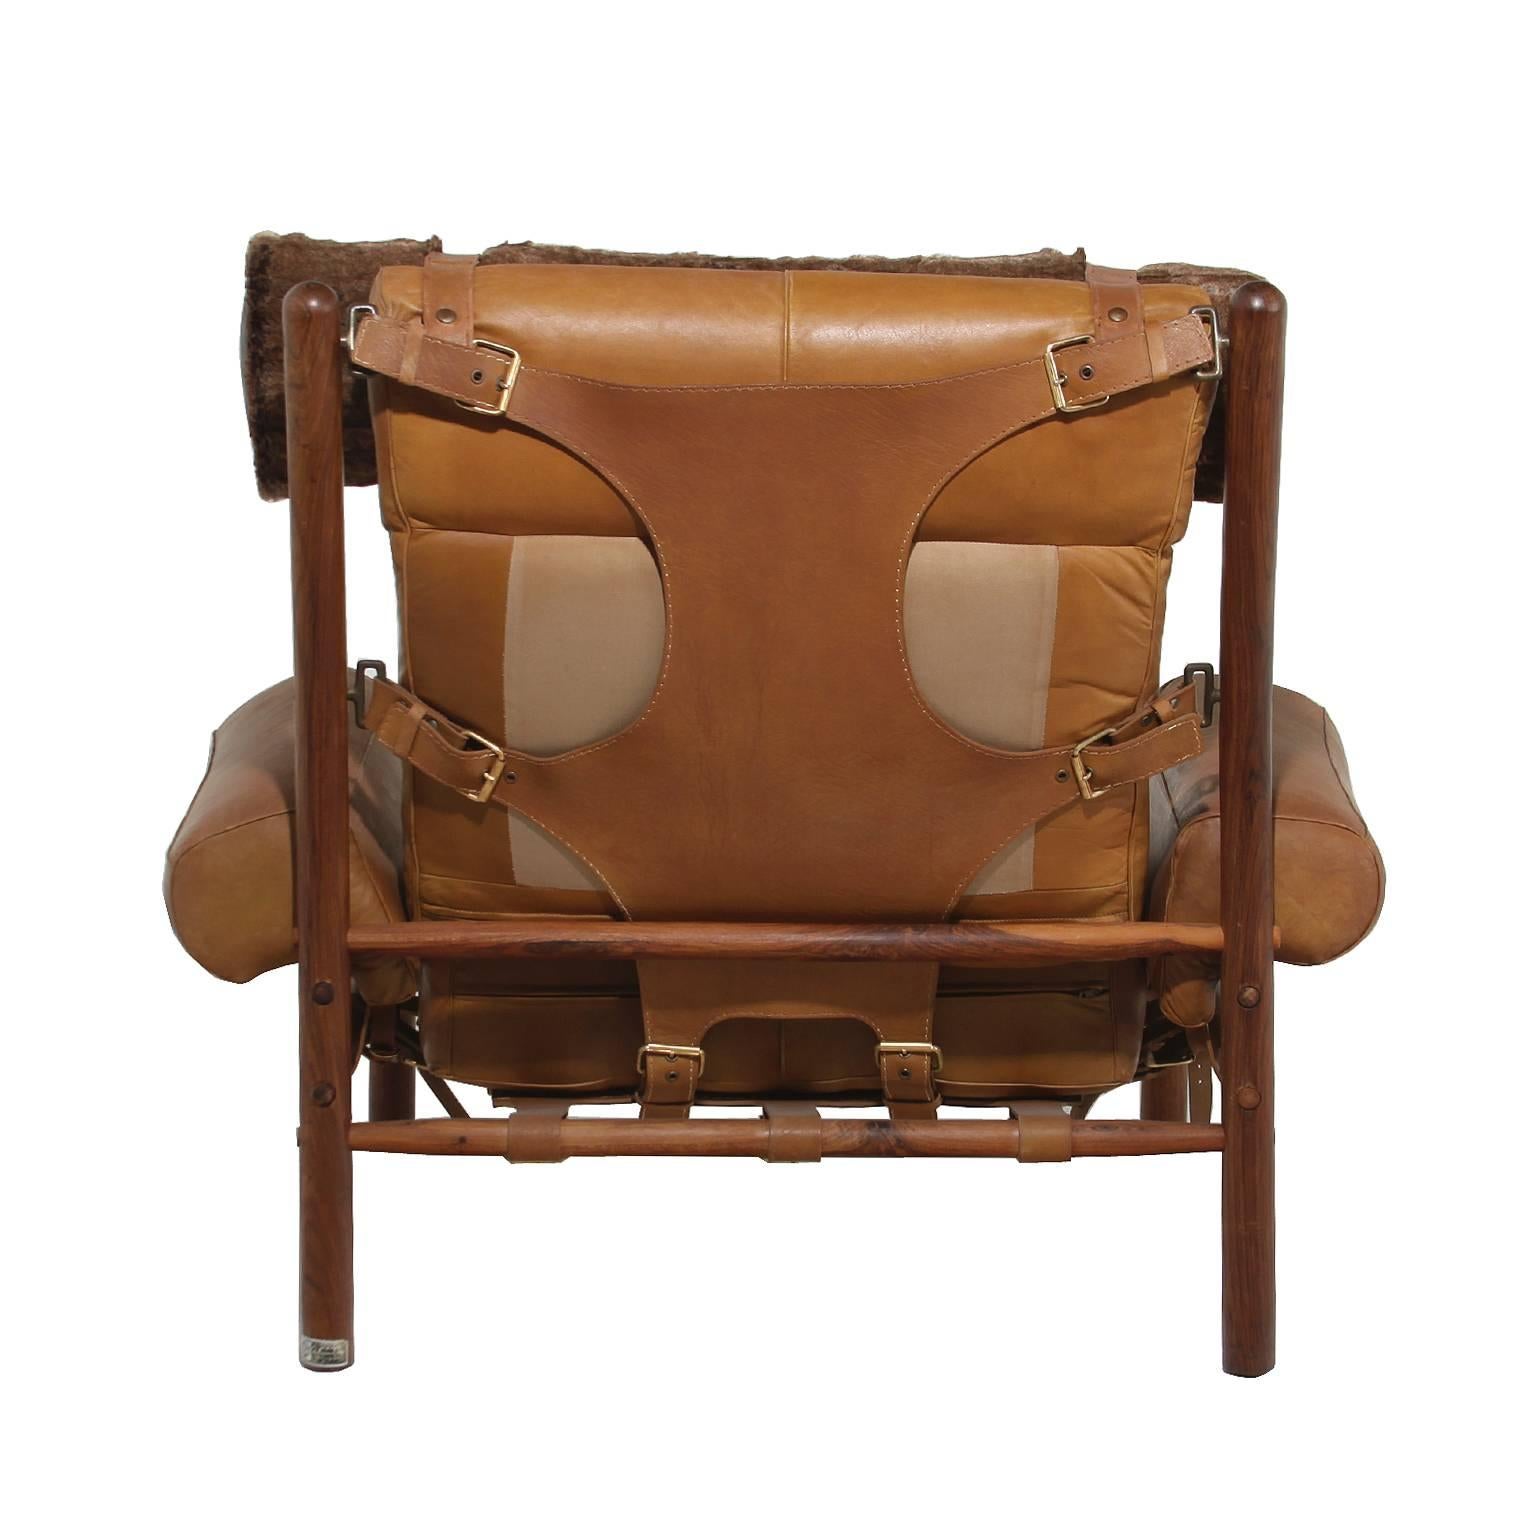 Mid-20th Century Armchair and Ottoman with Cognac Leather and Faux Fur Pillow by Arne Norell